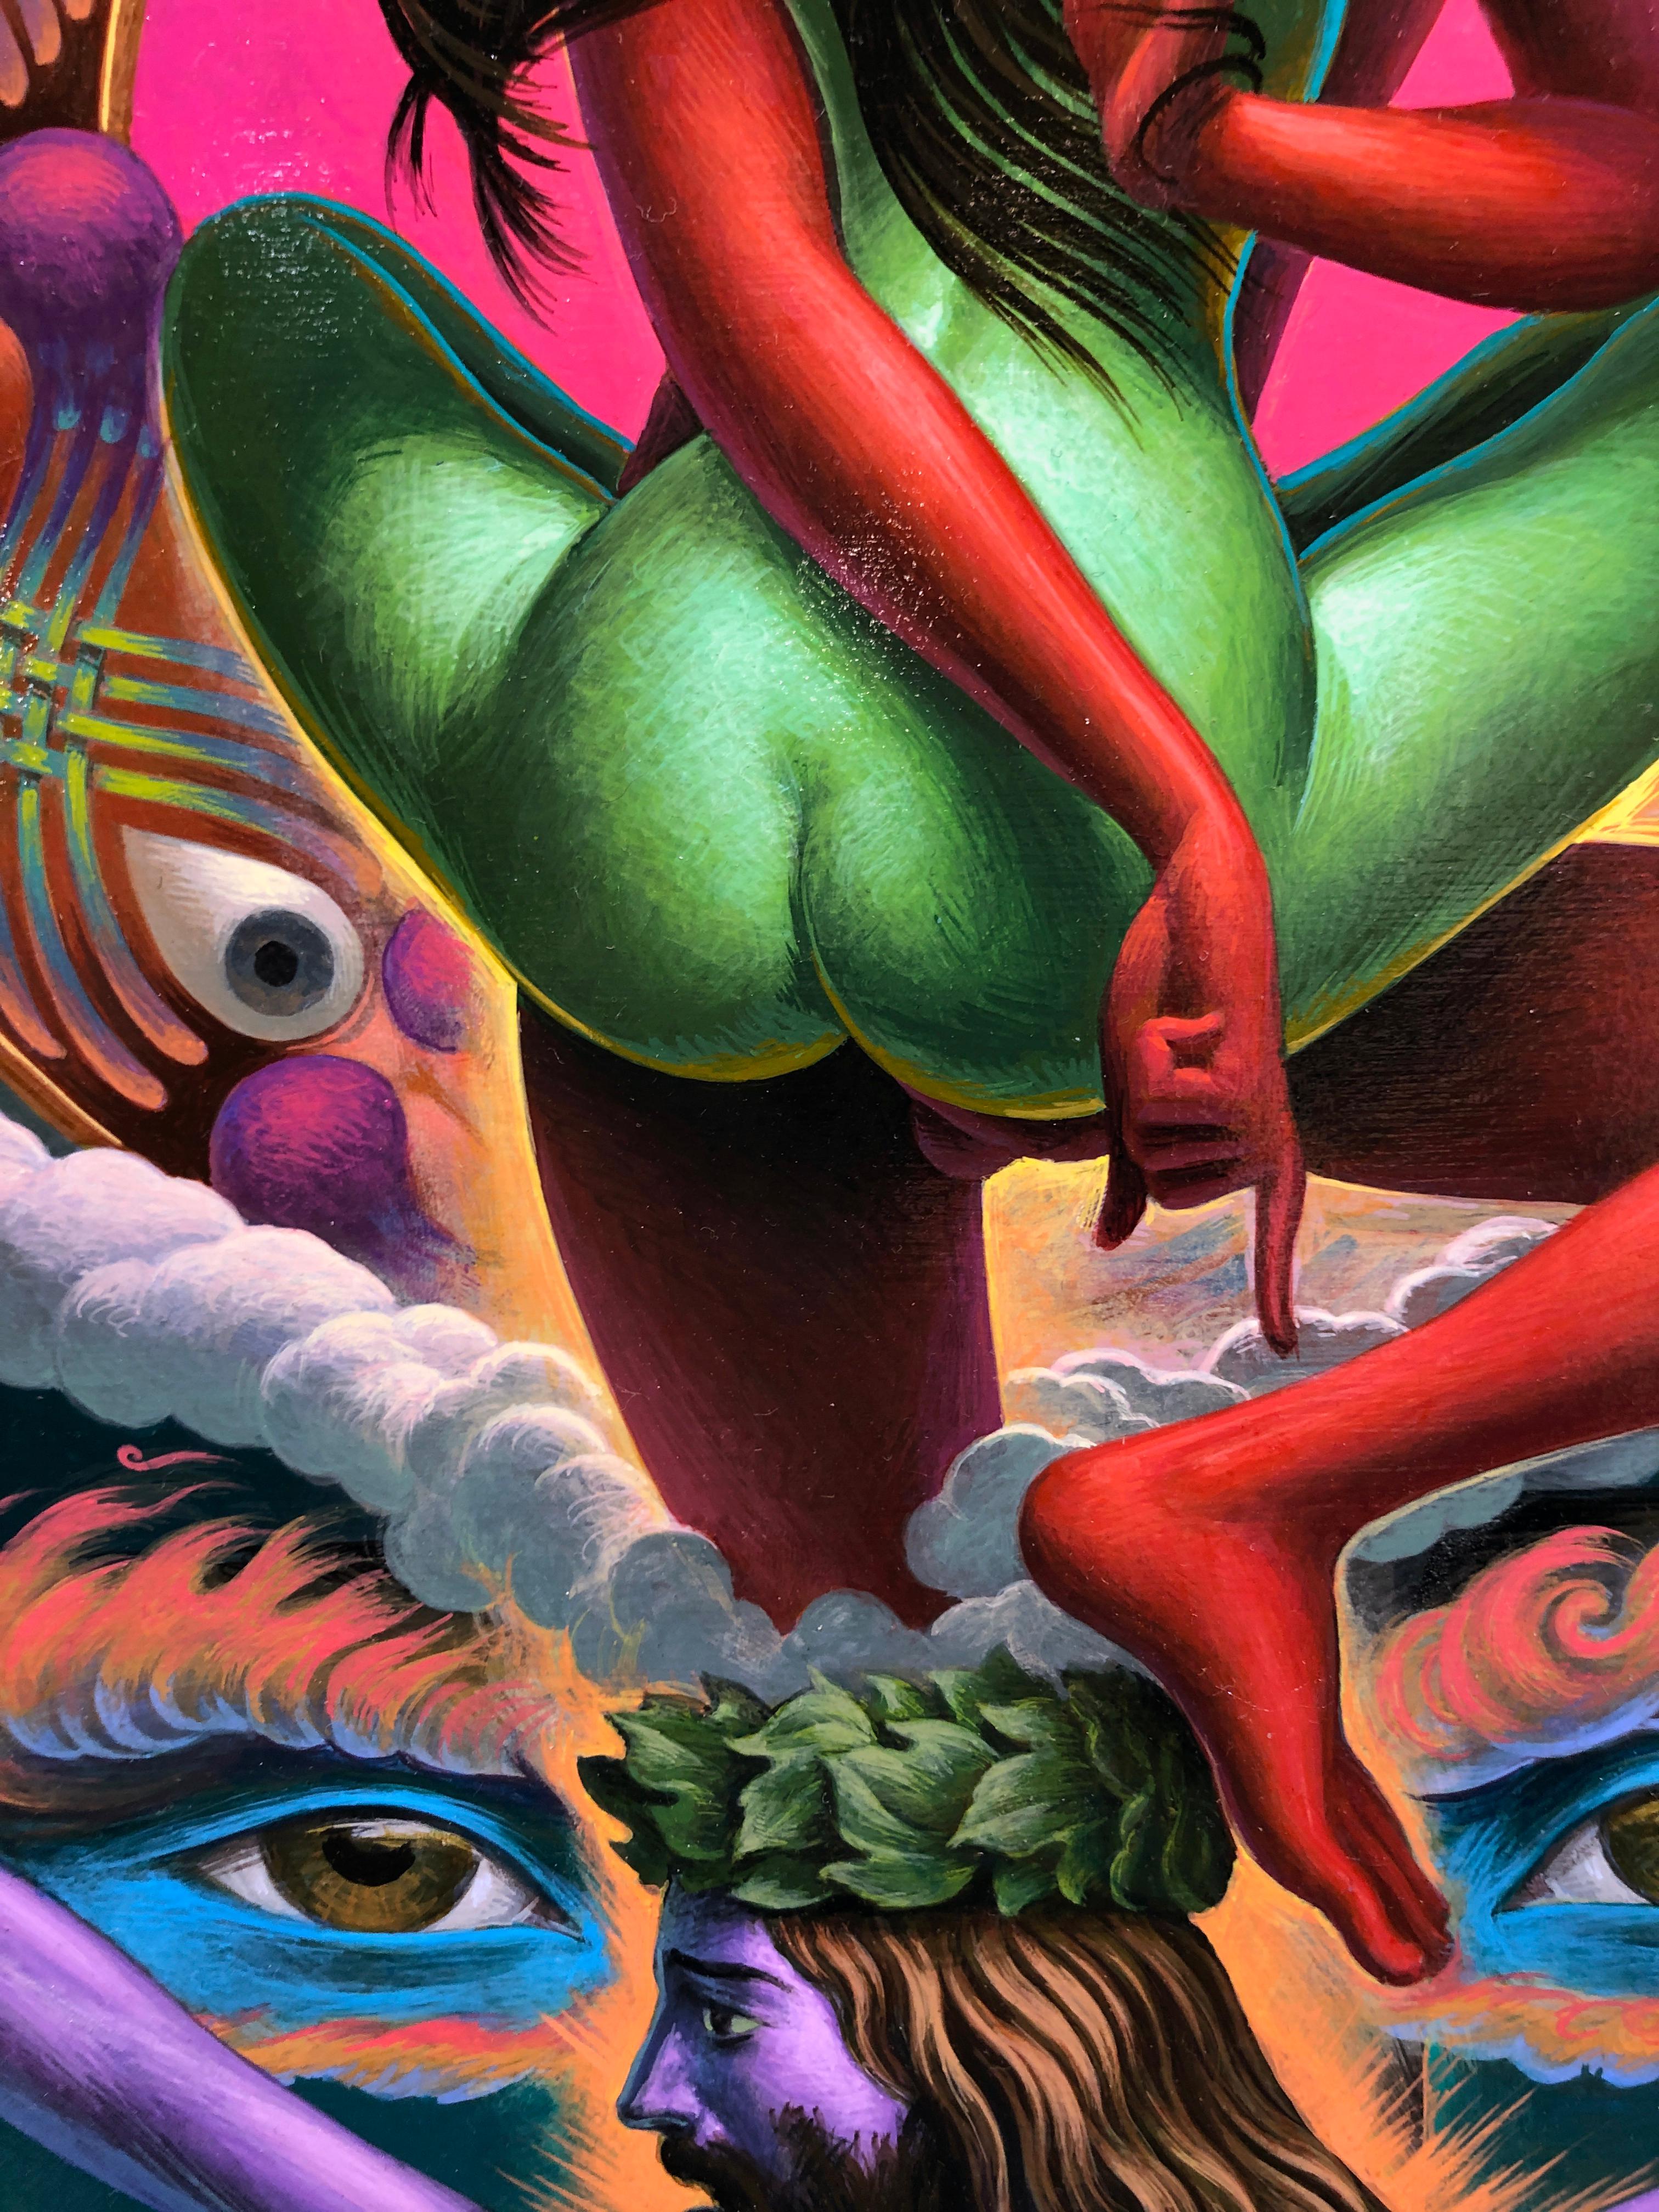 The Brazen Axis - Highly Detailed Surreal and Symbolic Painting 6